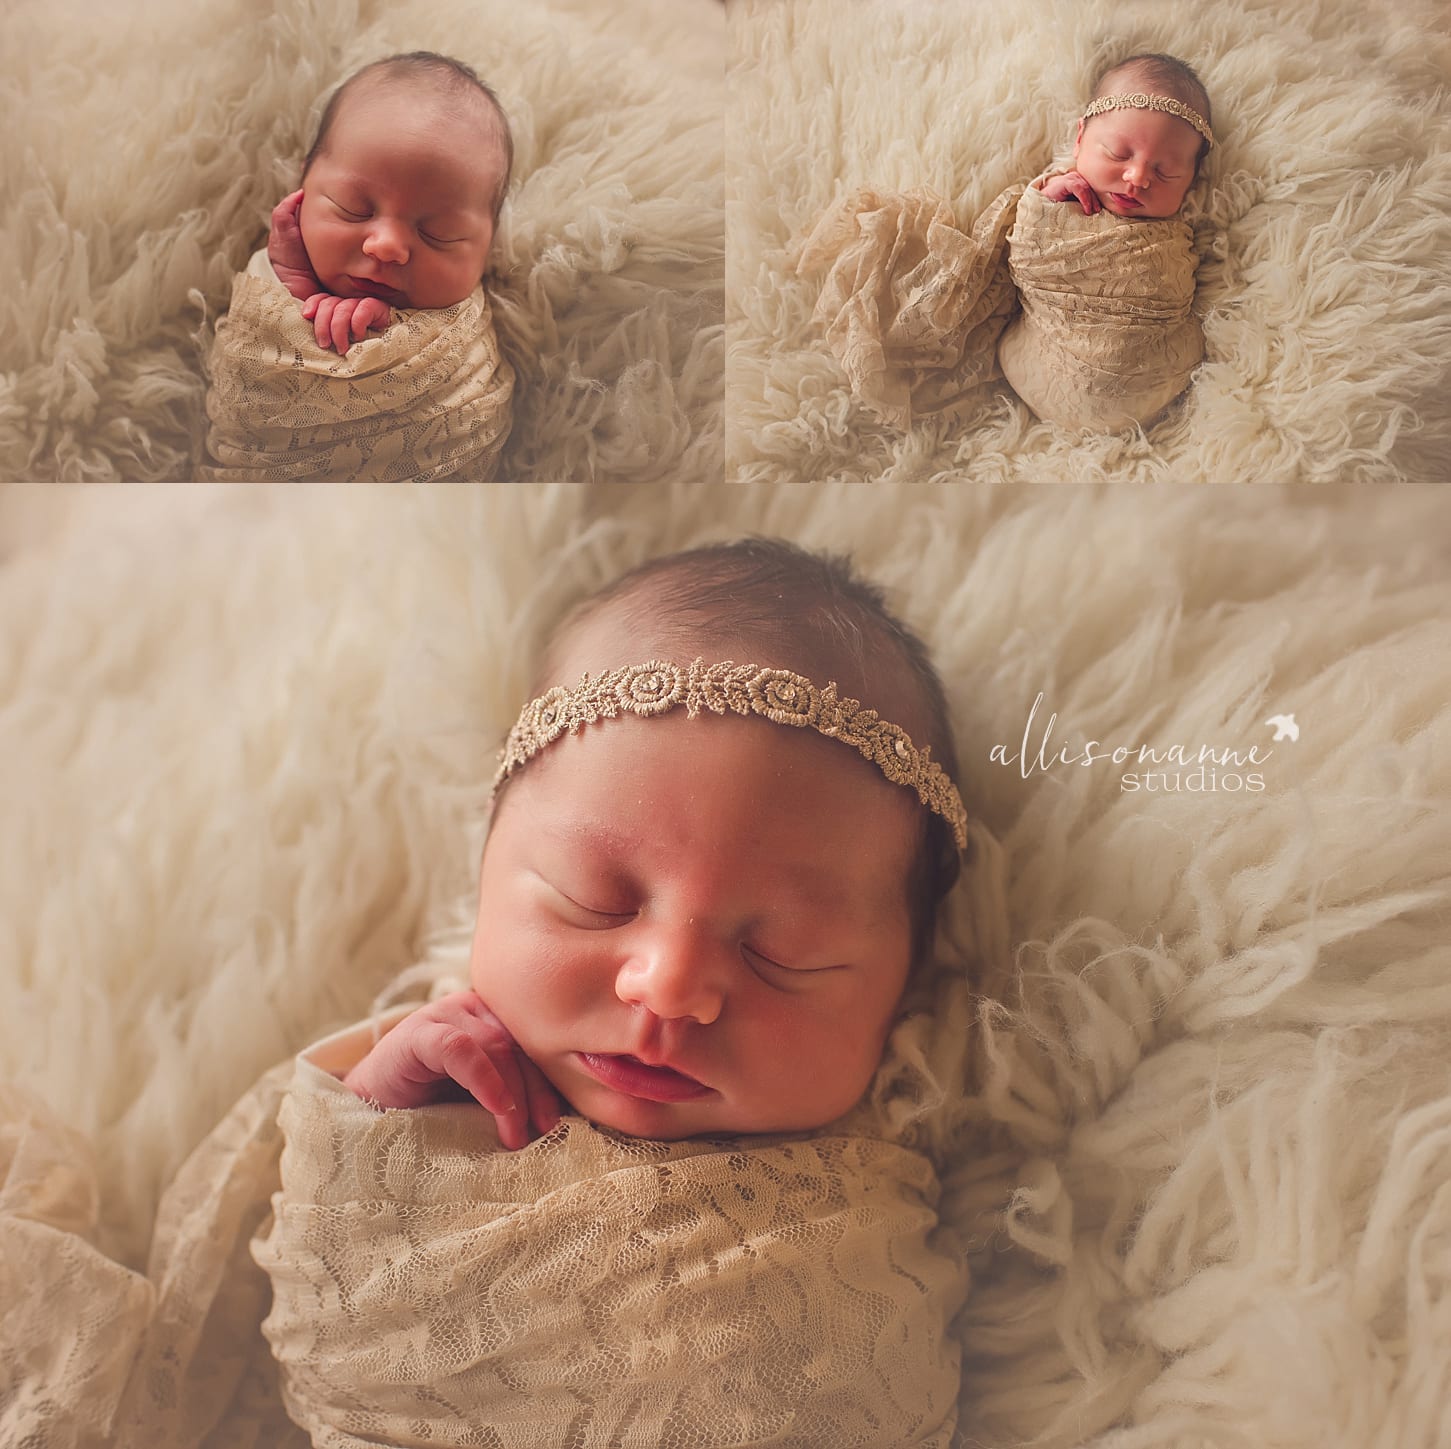 early, premie, Ellie, Petite Boutique, Luxe Hues, cream, neutrals, 20 days old, newborn sessions, studio sessions, Hammonton, best photographer South Jersey, AllisonAnne Studios, Allison Gallagher, love, baby